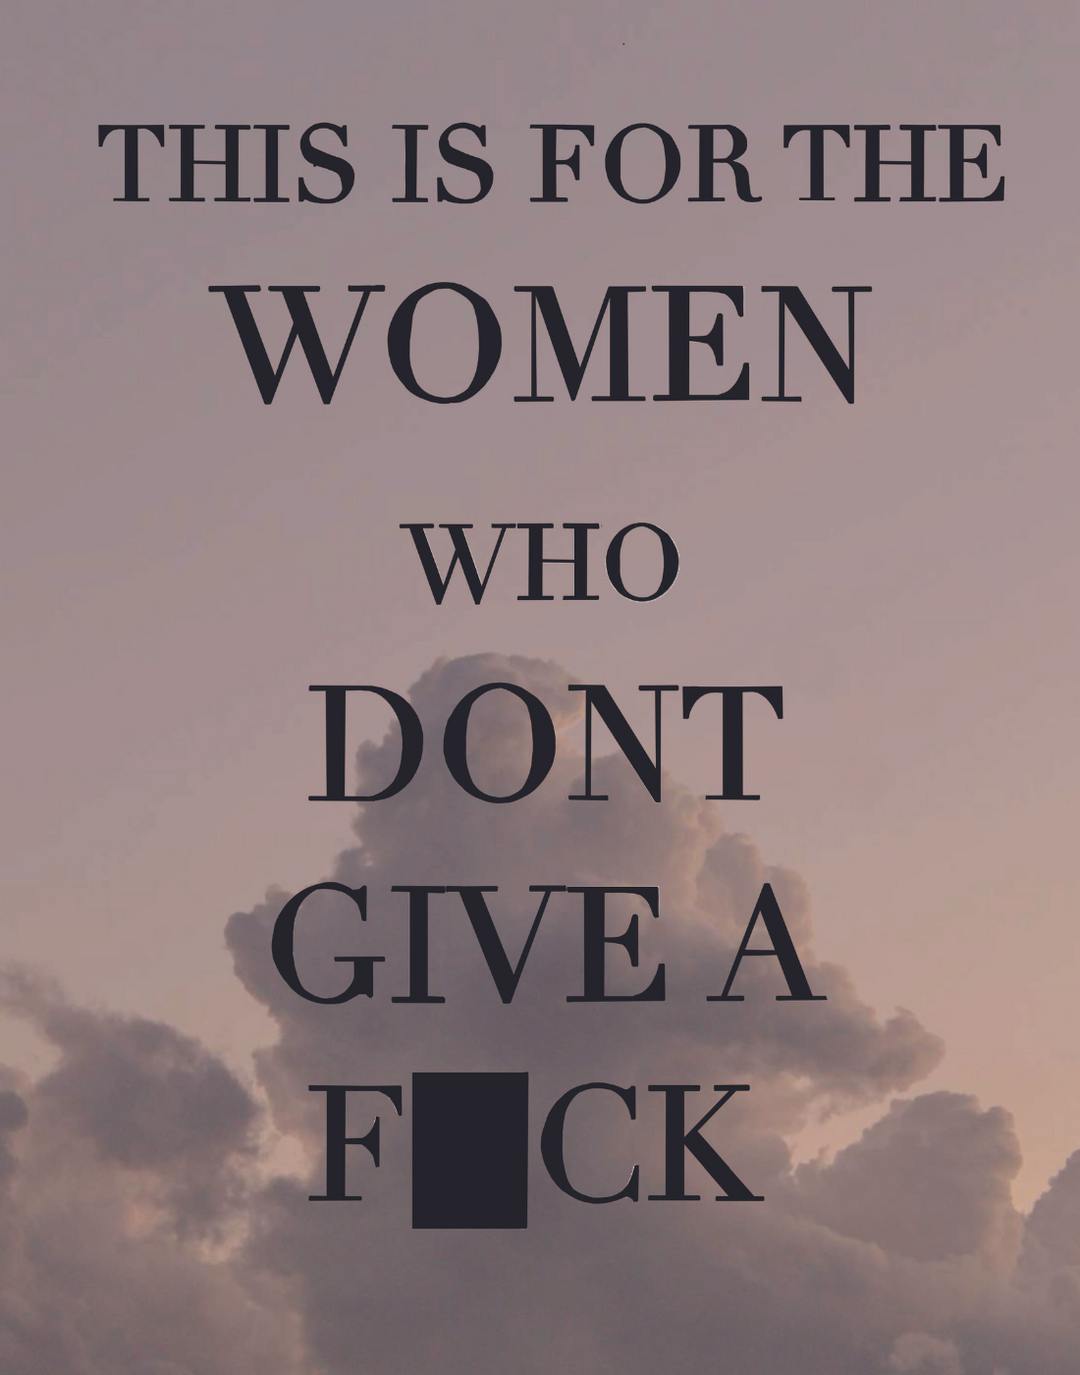 FOR THE WOMAN POSTER - PosterFi